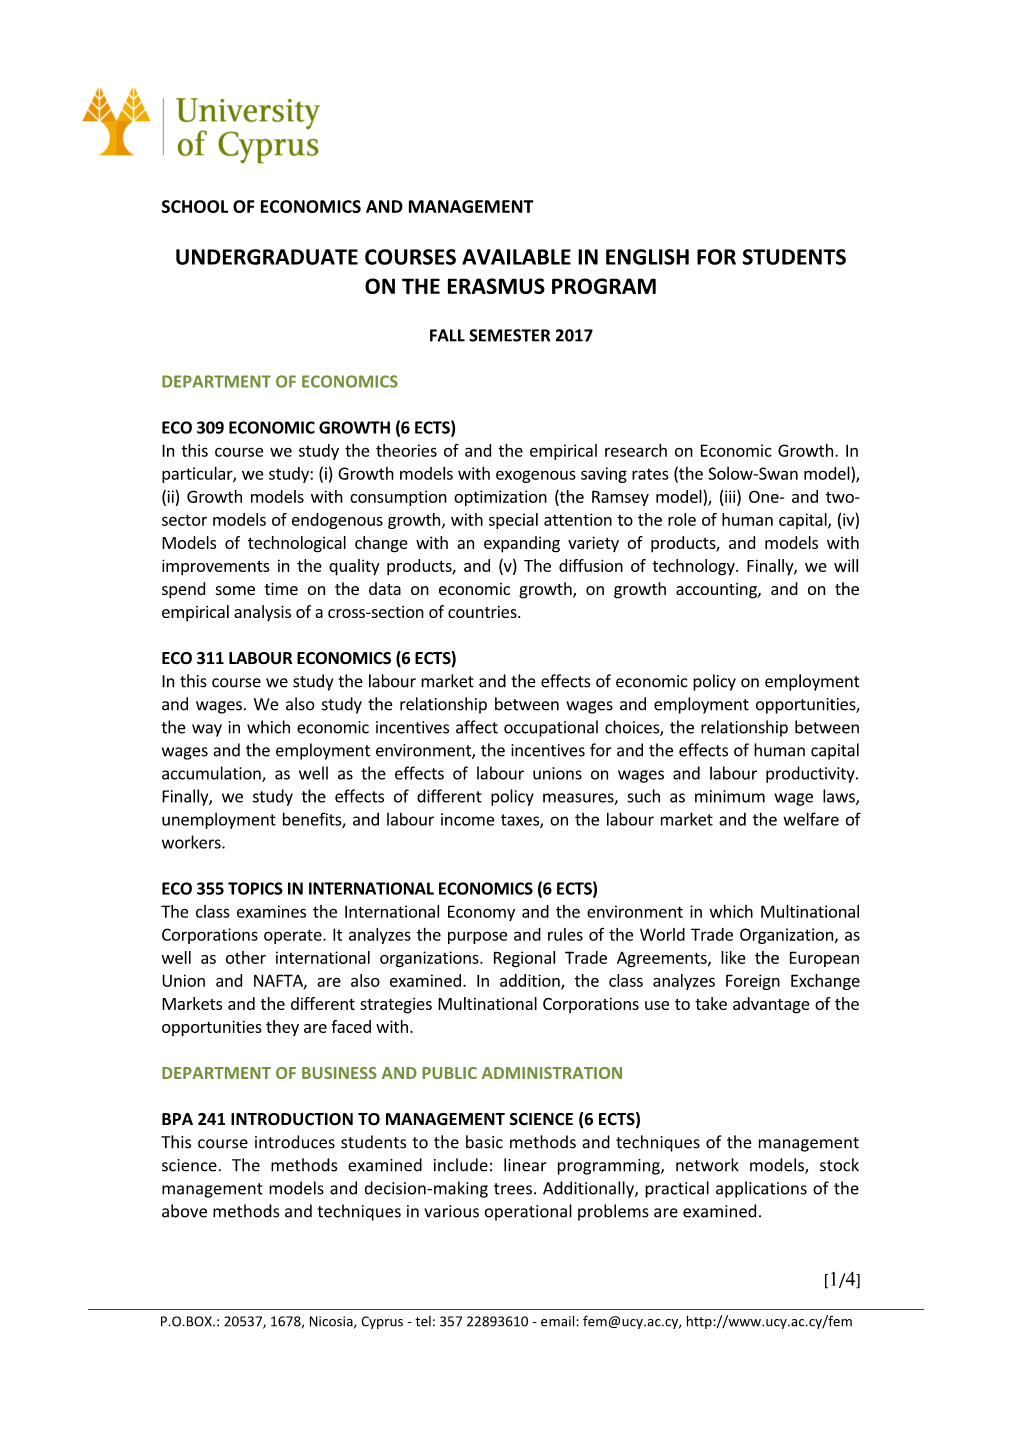 Undergraduate Courses Available in English for Students on the Erasmus Program